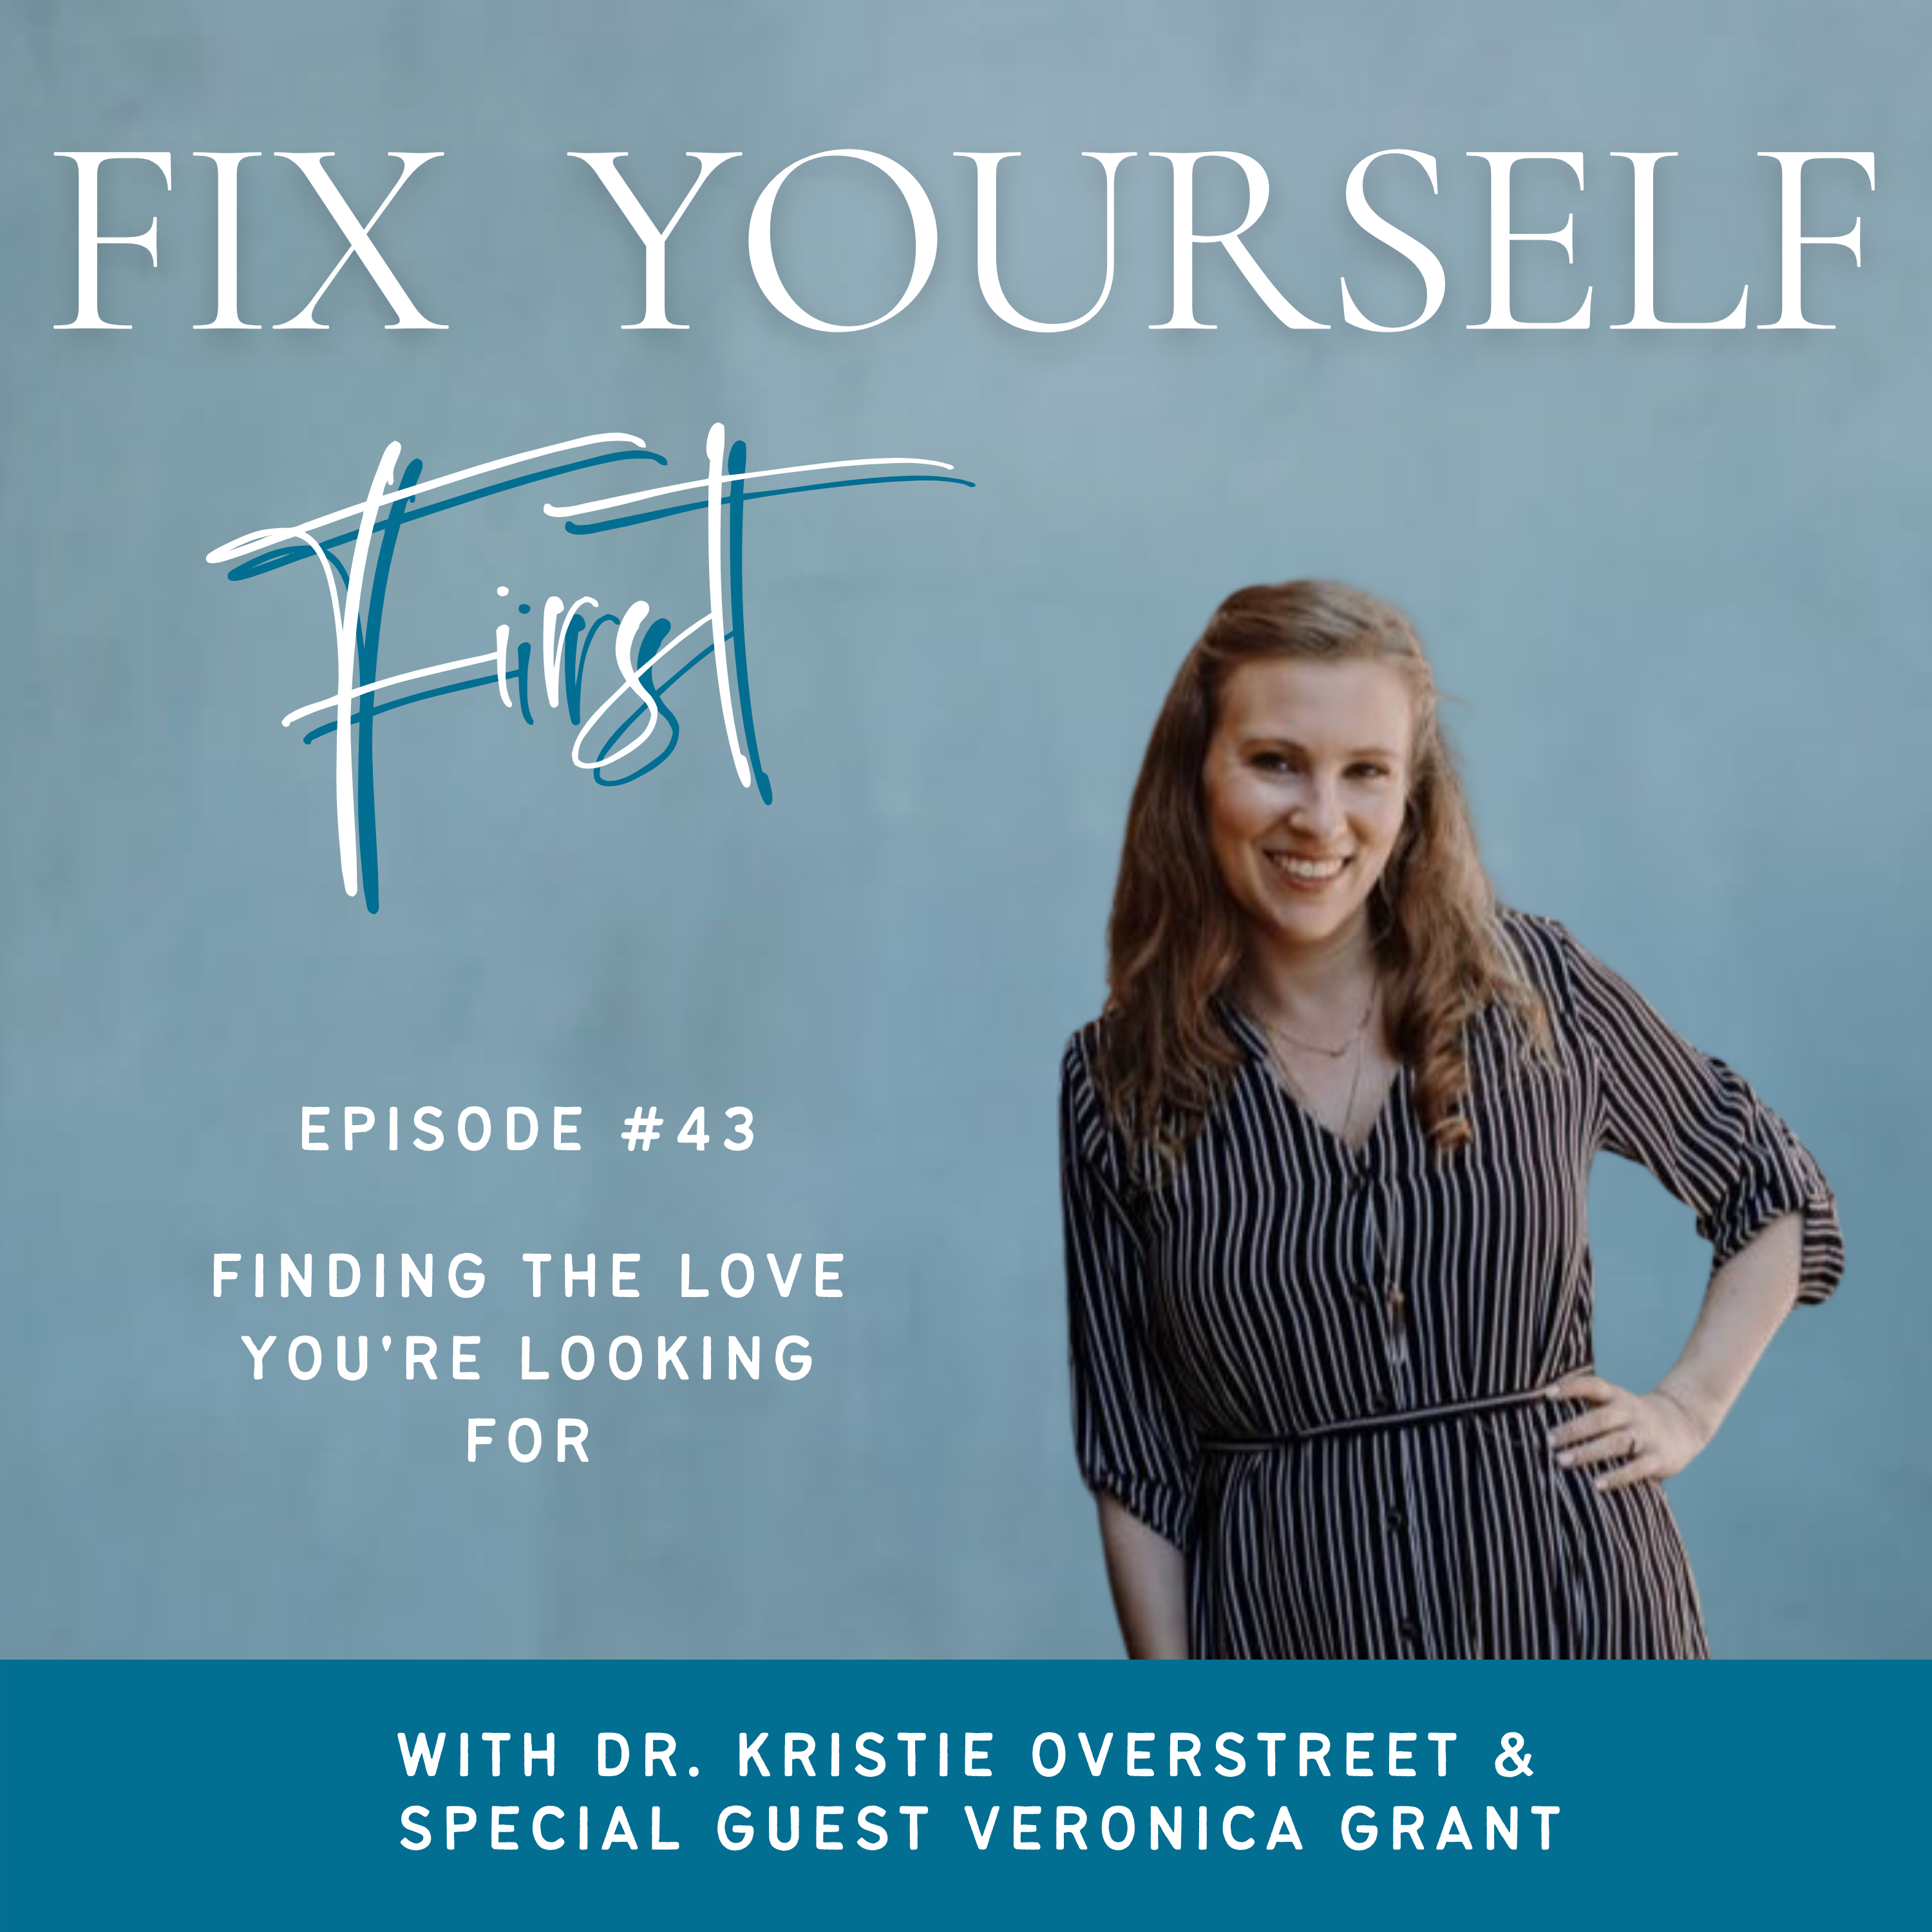 Fix Yourself First - Episode 43